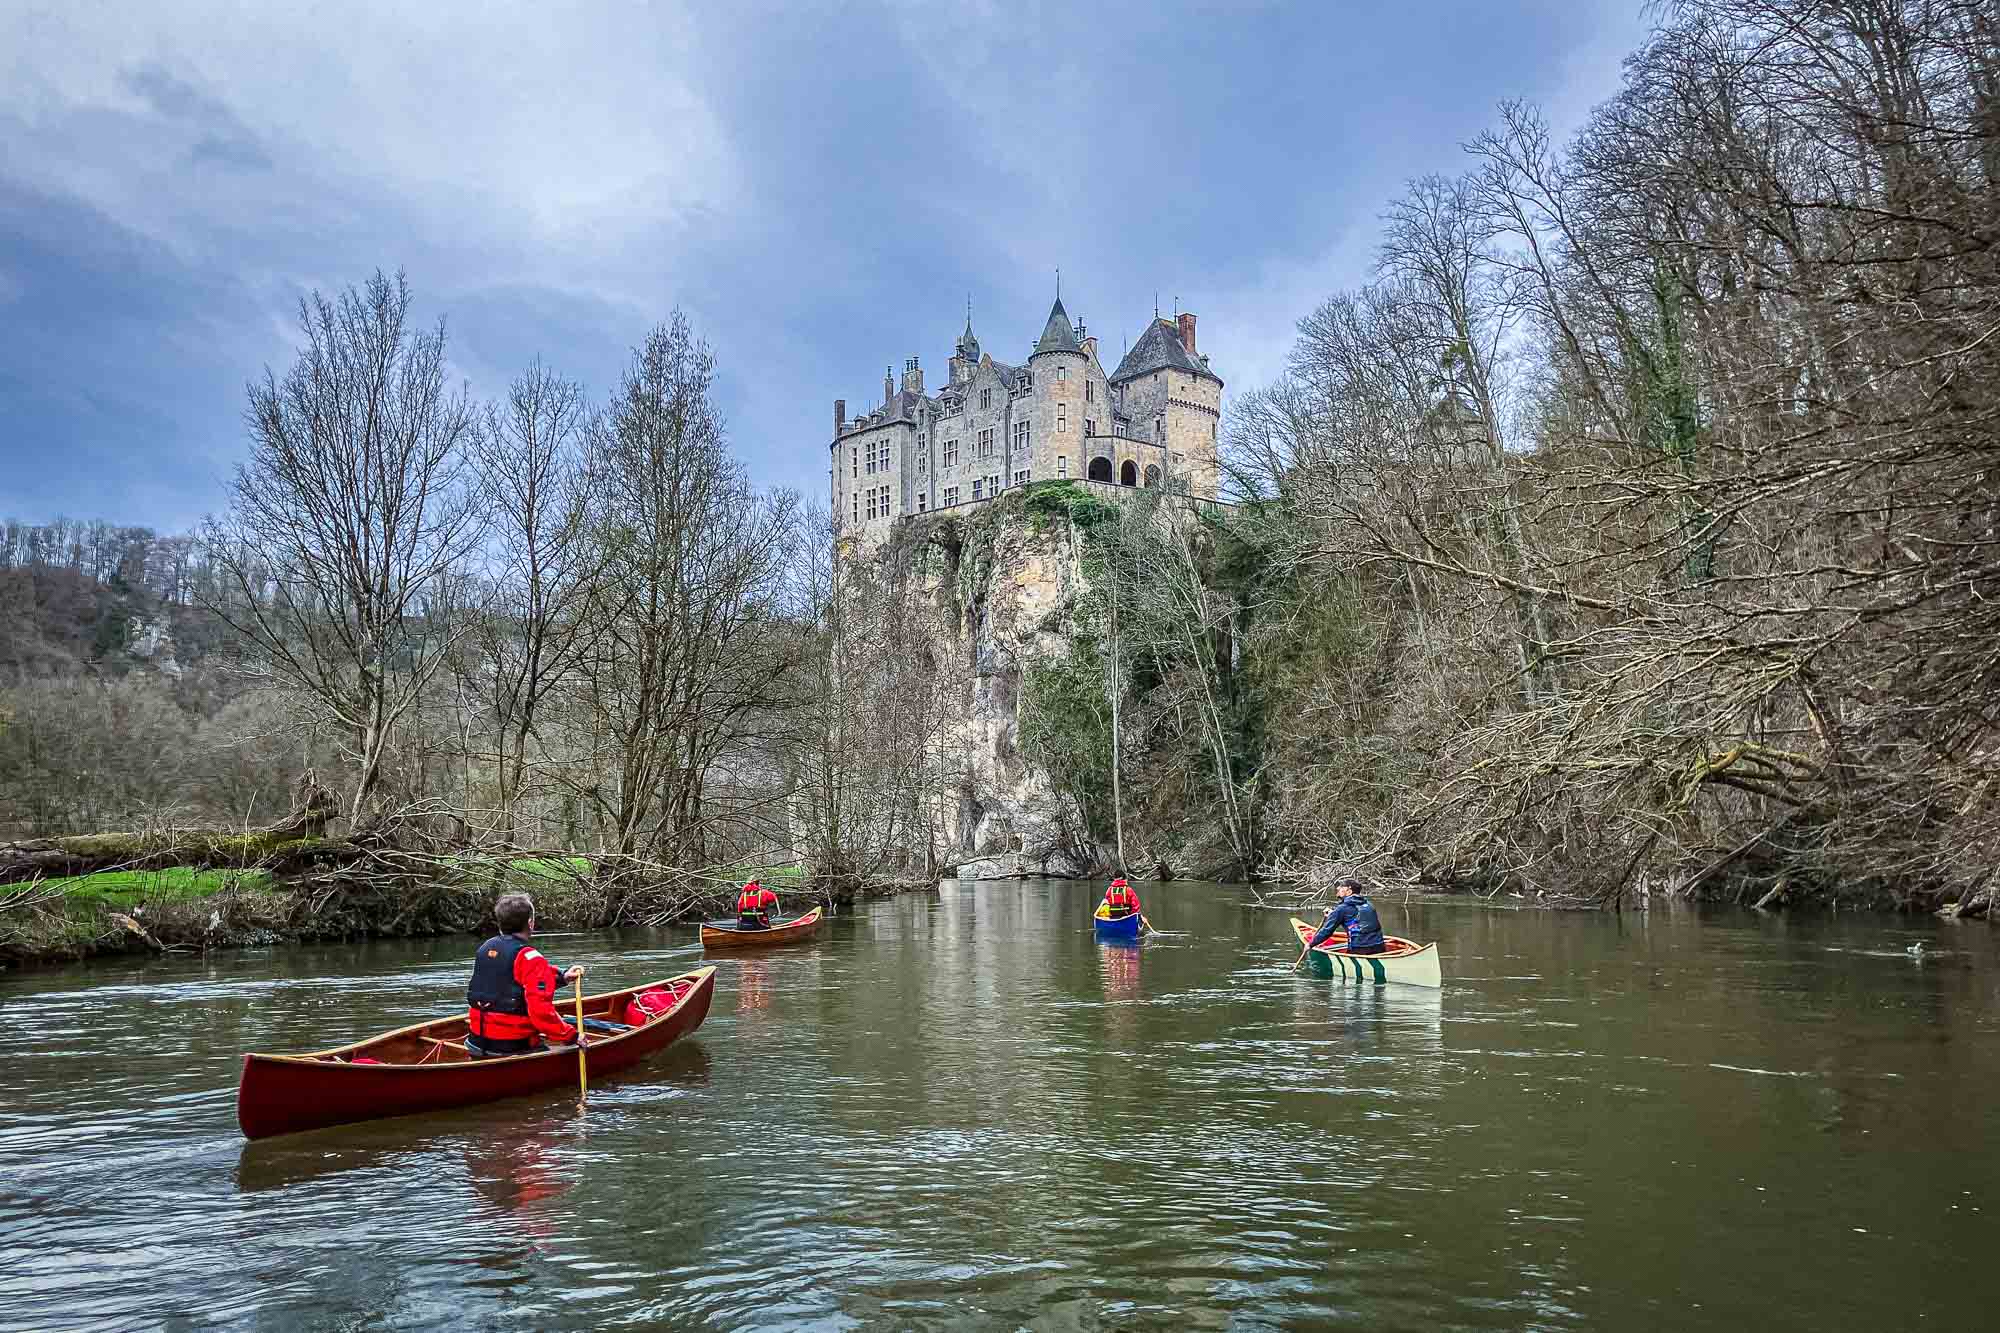 Mastering the art aof canoeing on the Lesse River near the Chateau de Walzin